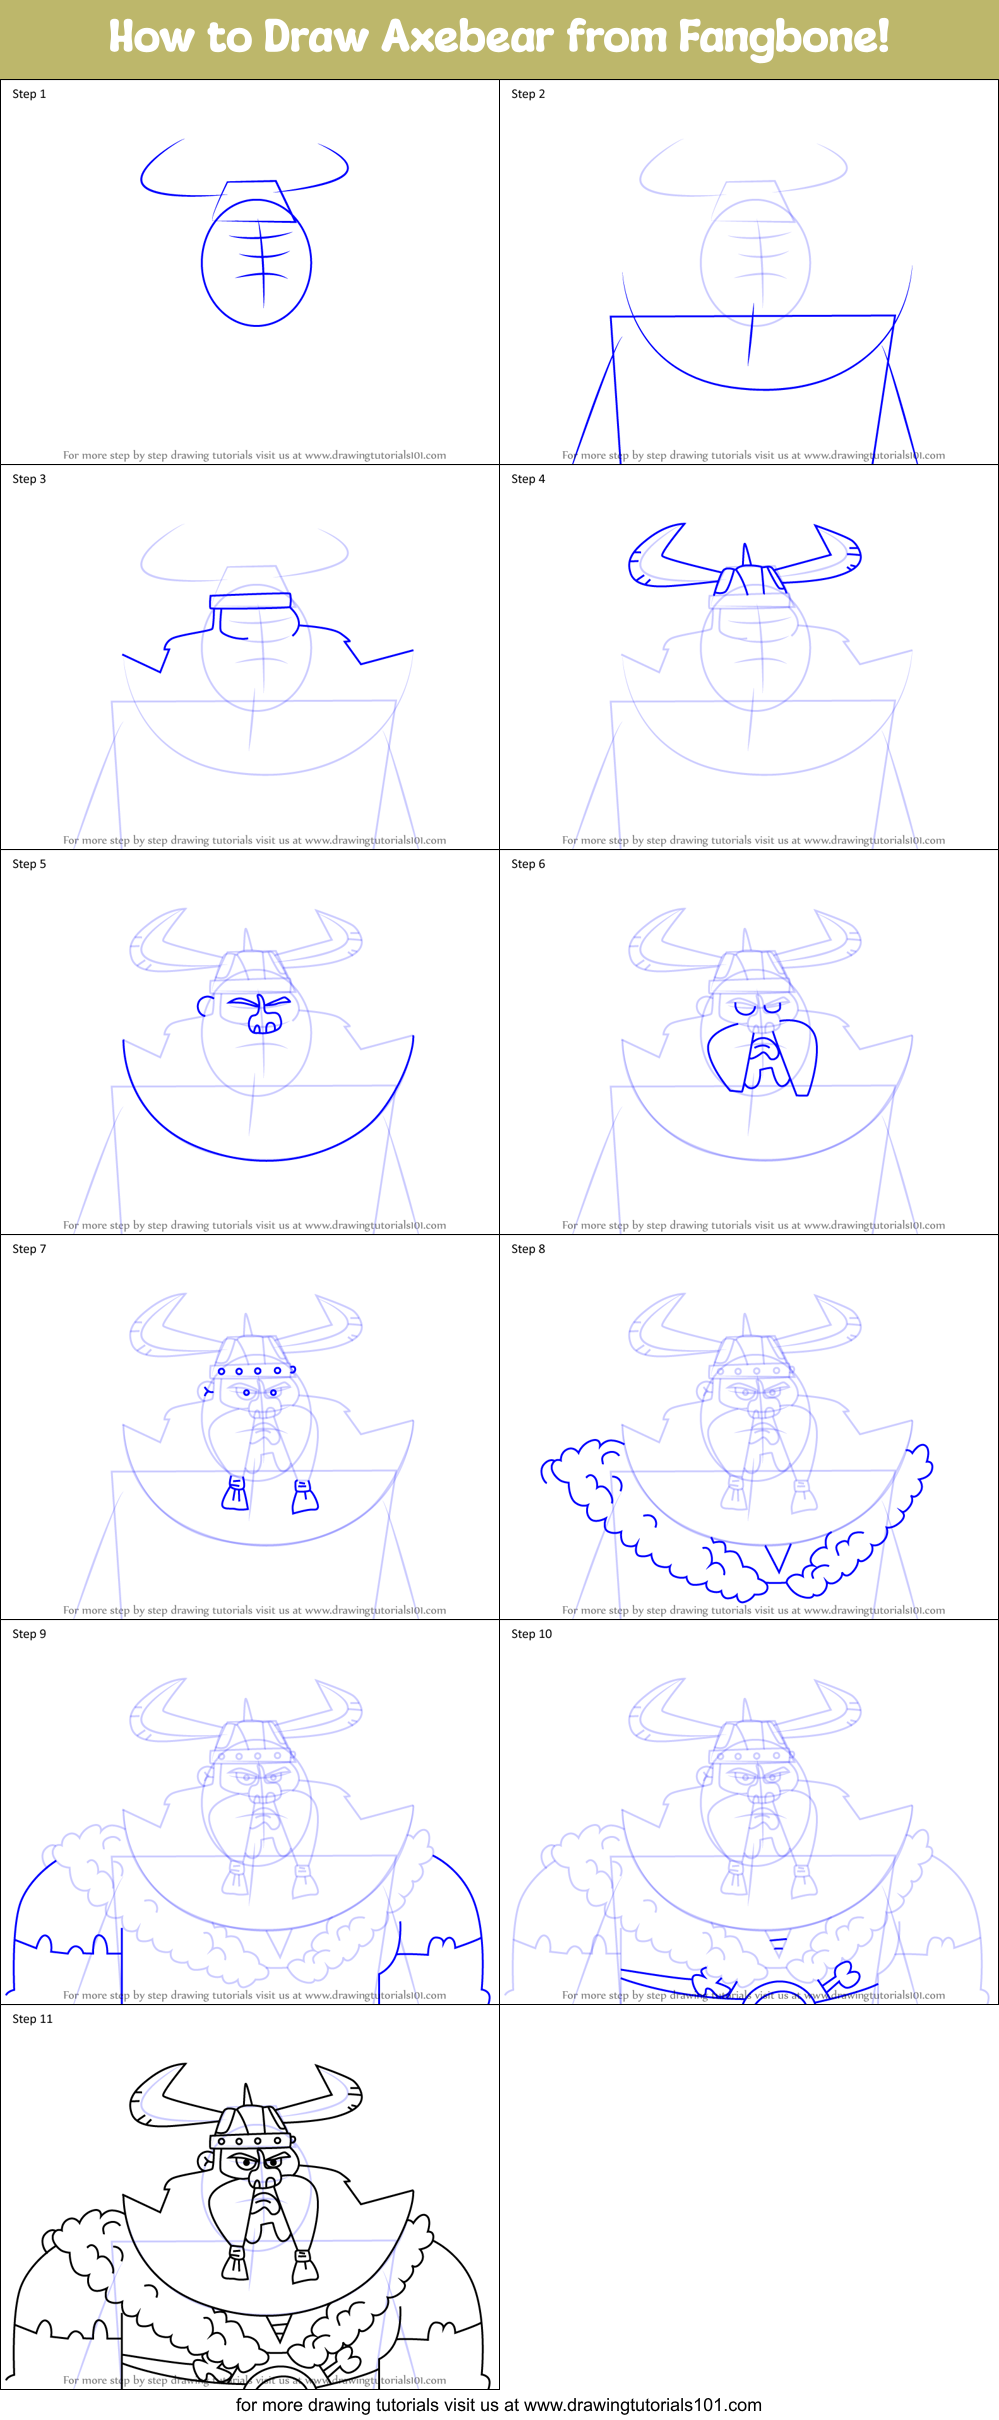 How to Draw Axebear from Fangbone! (Fangbone!) Step by Step ...